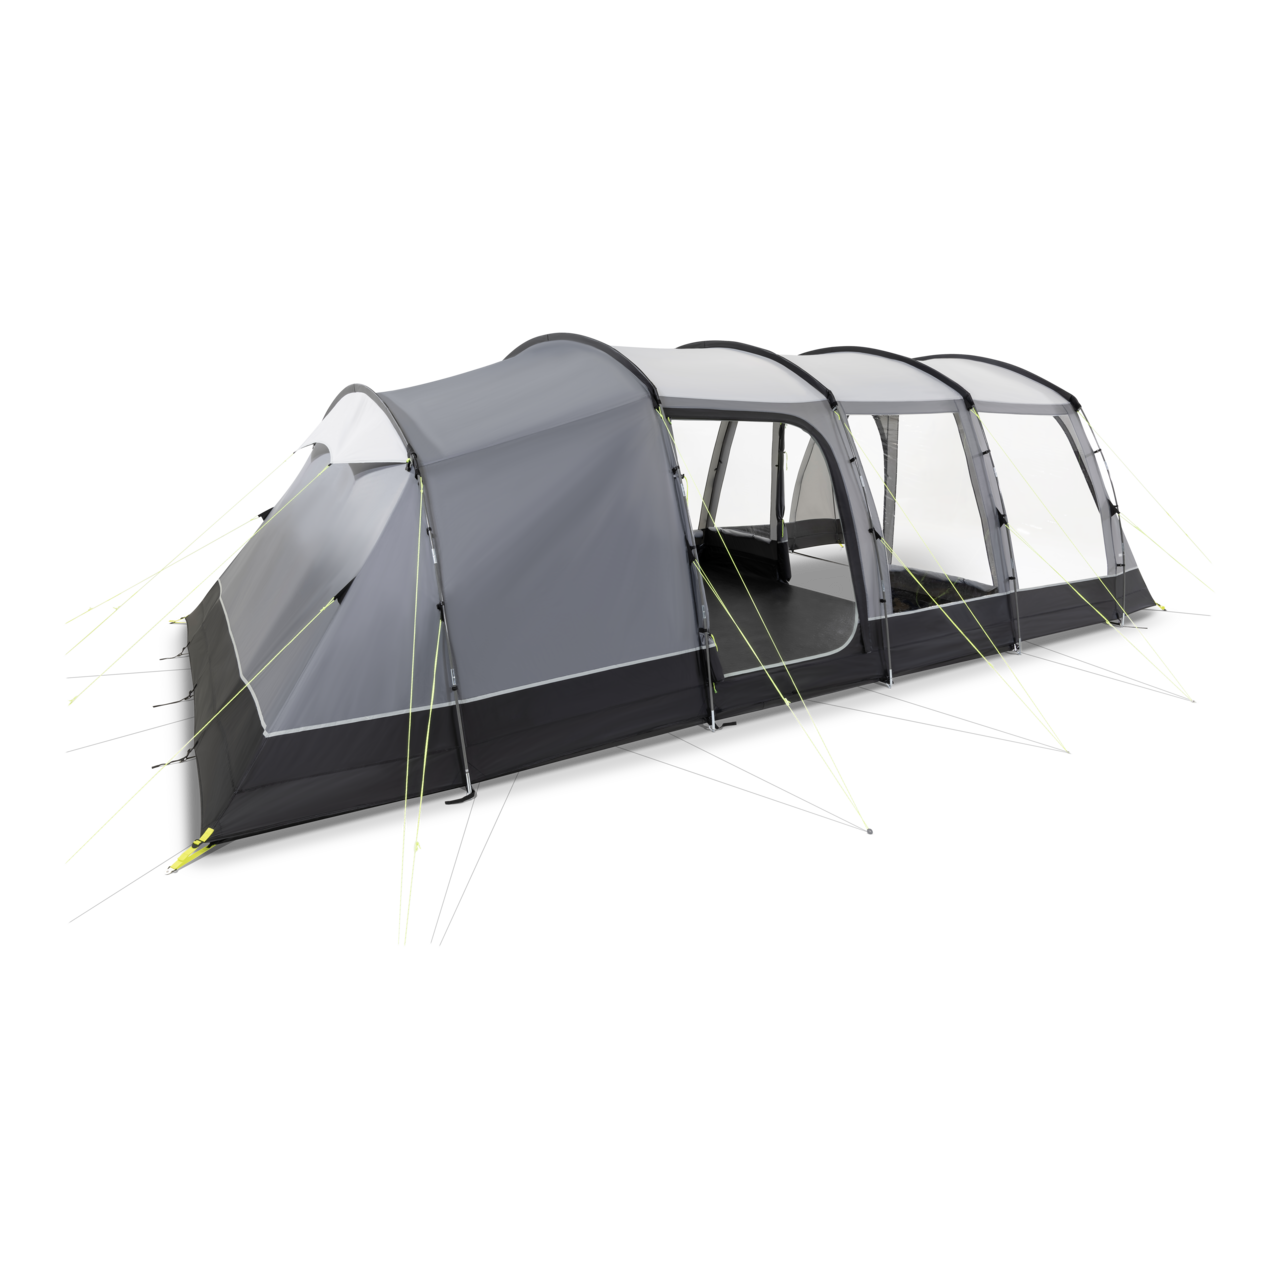 Kampa Hayling 6 - 6 Person Poled Tent - Available in store only